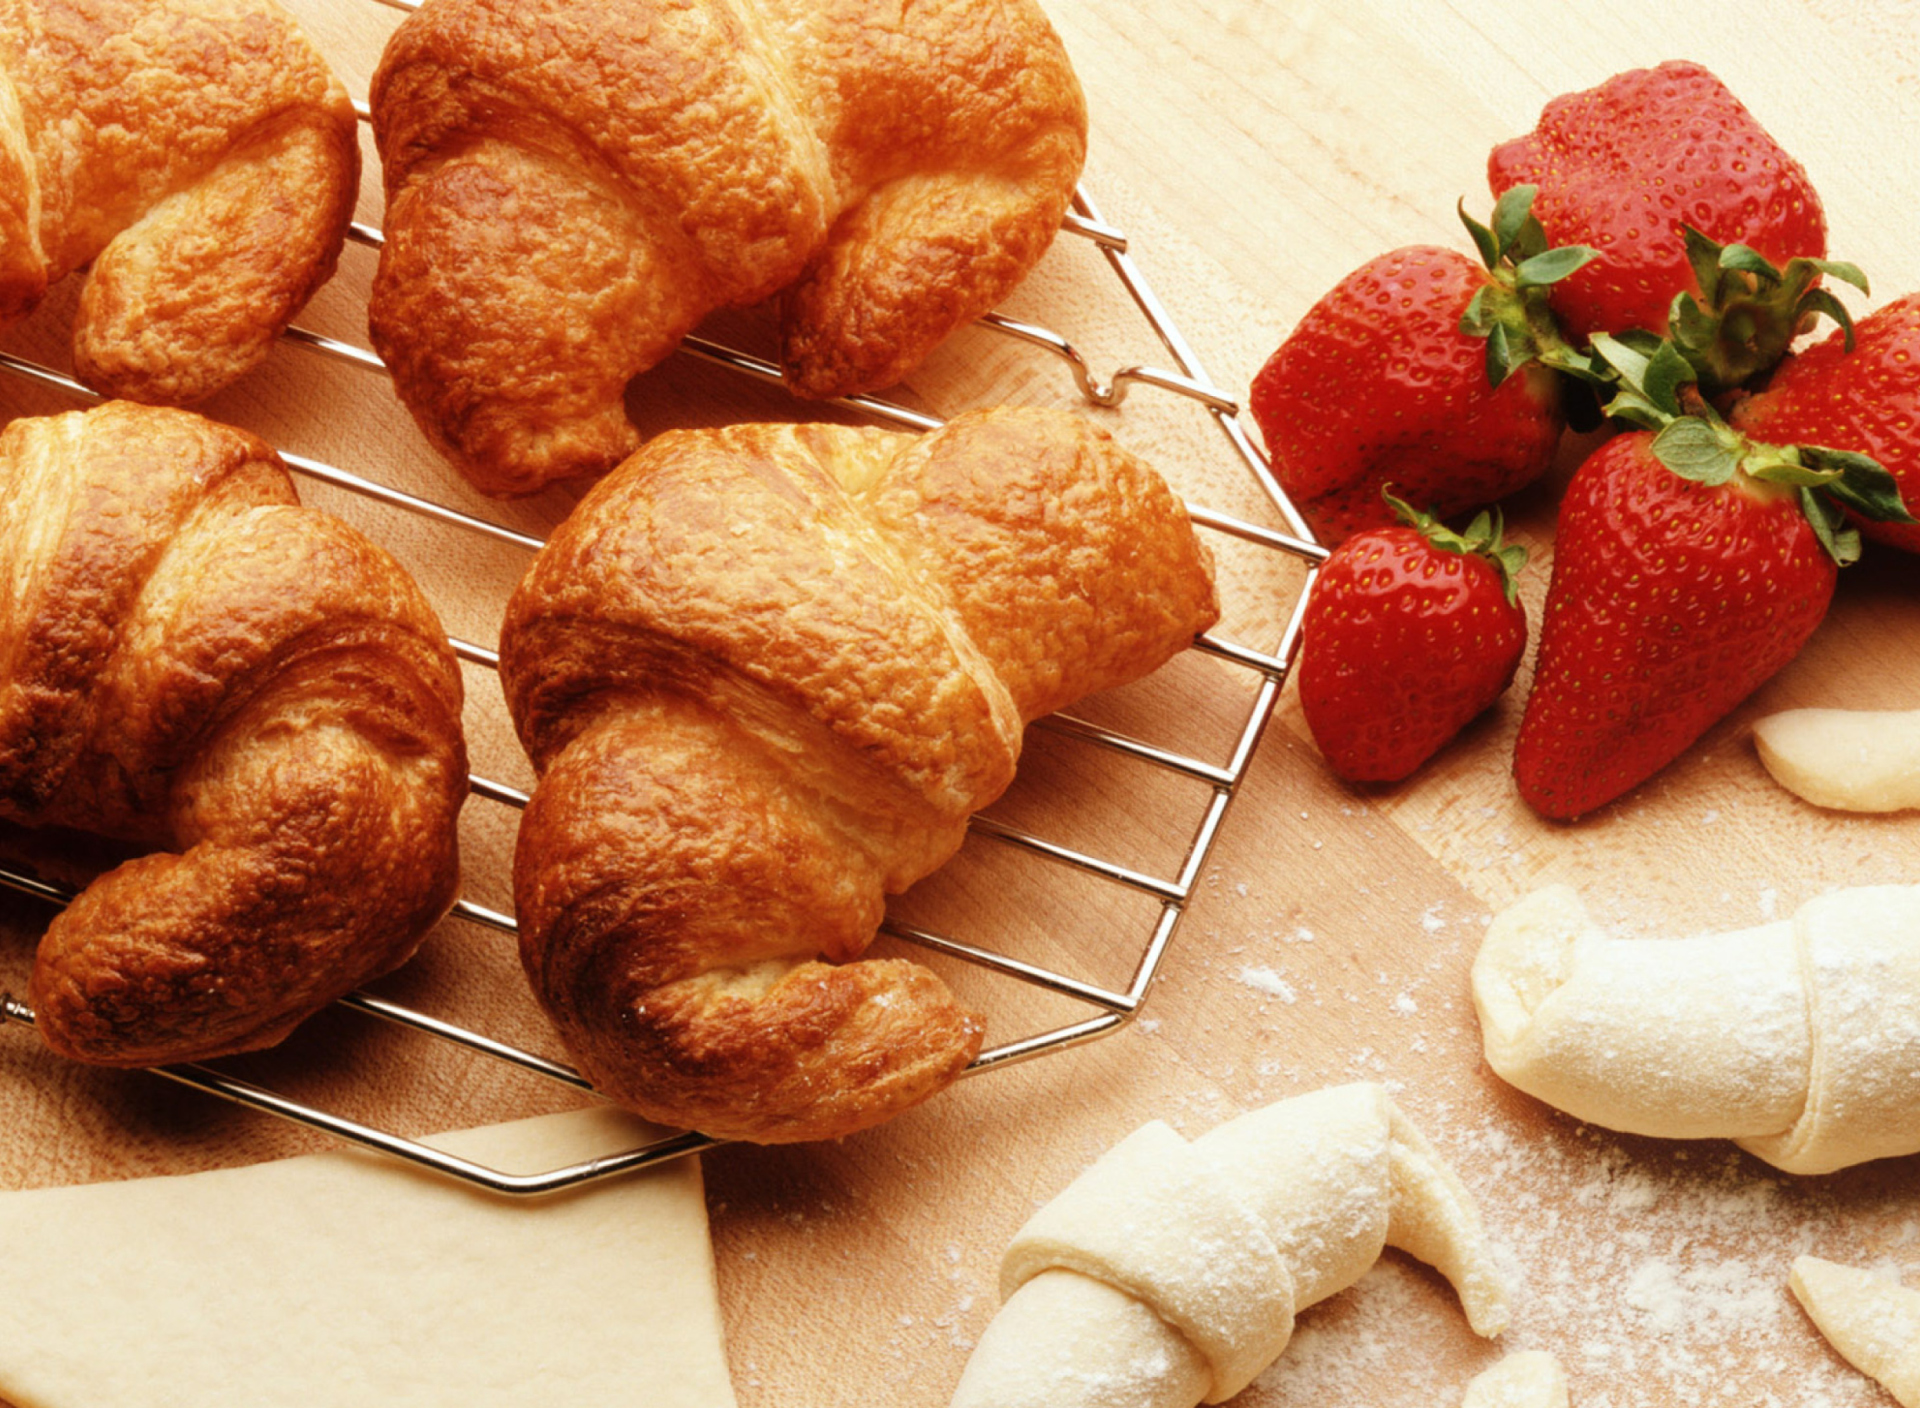 Croissants And Strawberries wallpaper 1920x1408